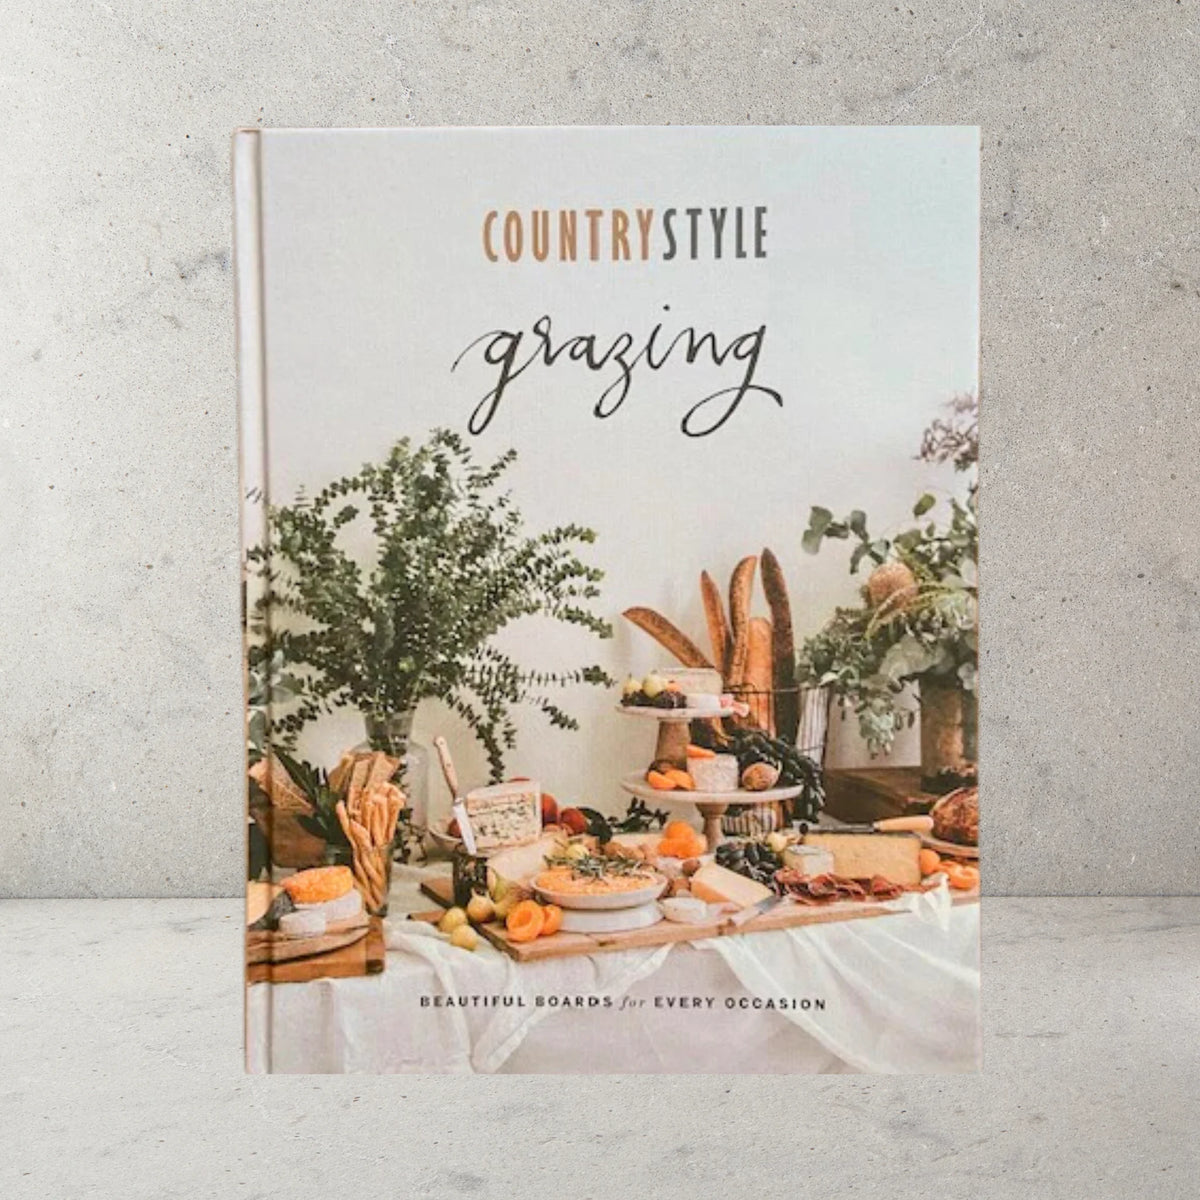 The Australian Womens Weekly Country Style Grazing Cookbook with hard cover. Shows table set with grazing board, native greenery and fresh bread.